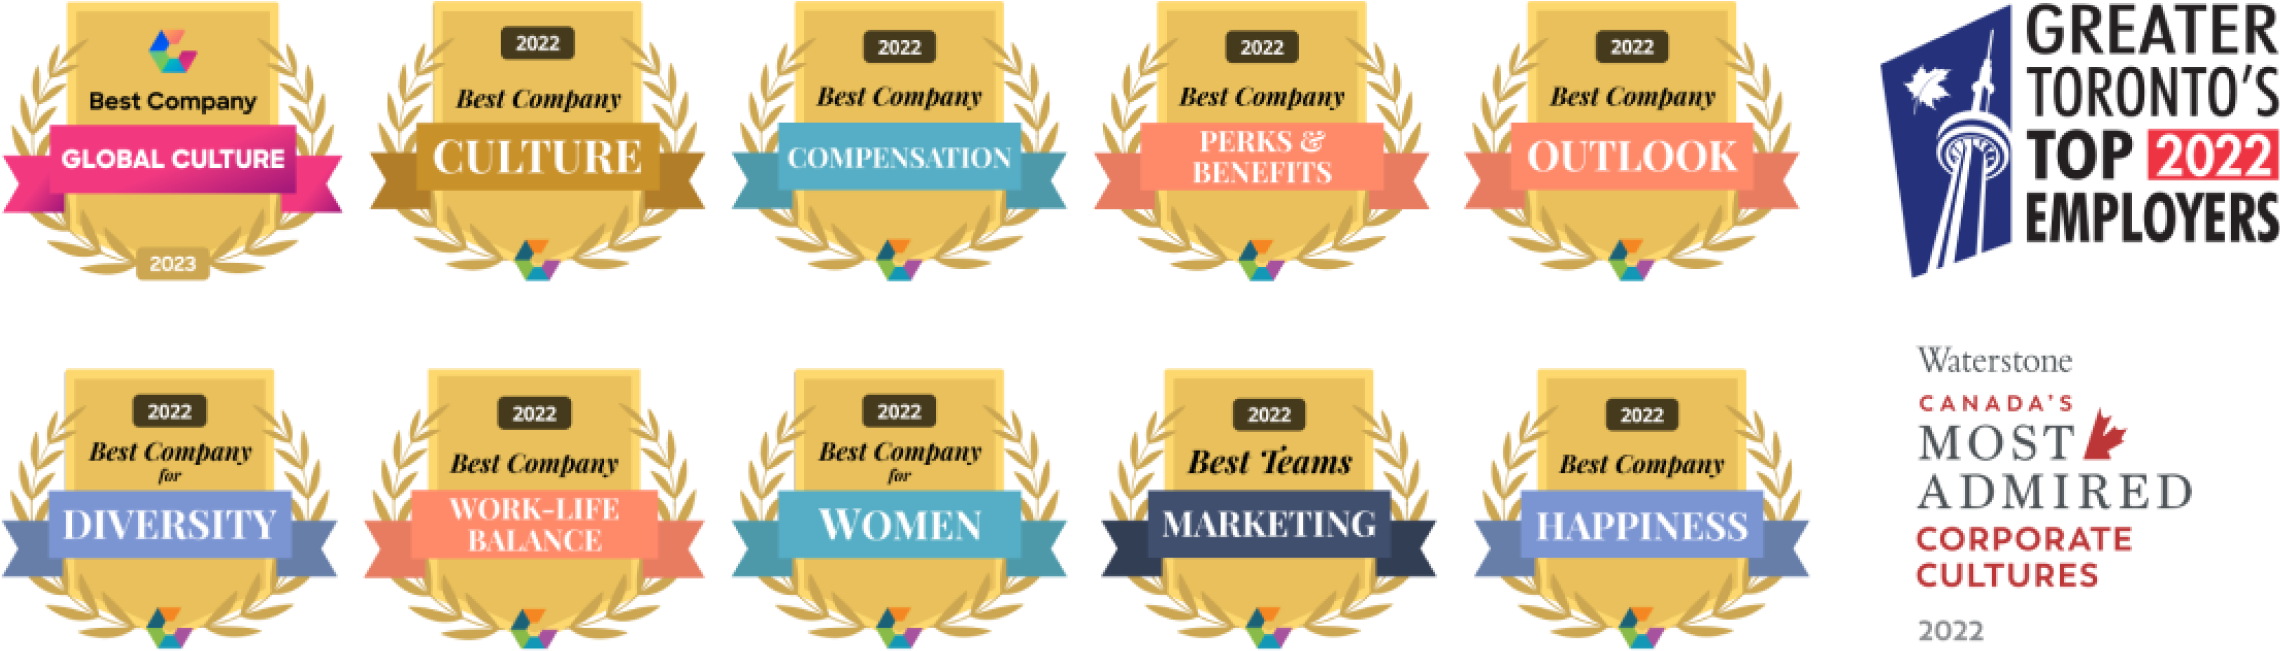 A graphic featuring several of the Awards Vena won in 2022.